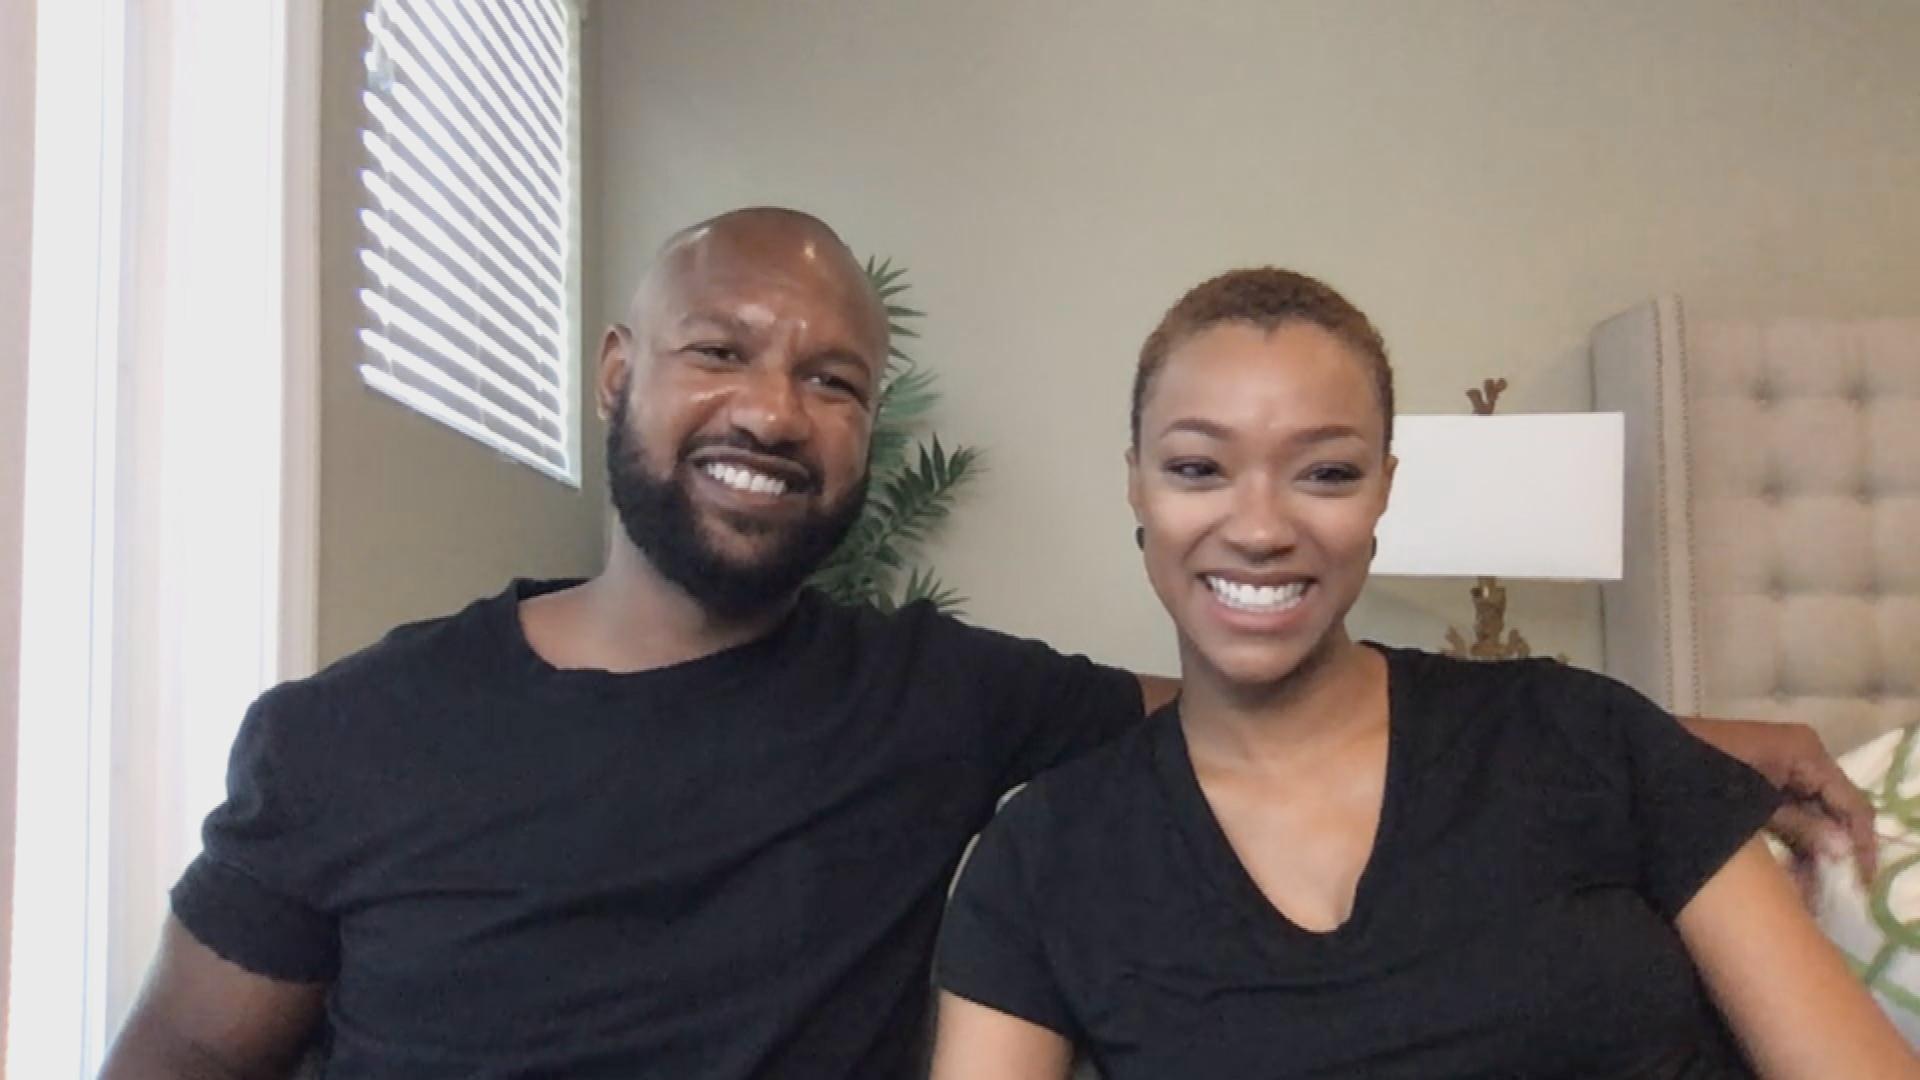 Friday Night In With the Morgans Episode 7 Bonus Segment: Did Carole Baskin Kill Her Husband?, The group ponders the question of the moment and talks about the animals they've rescued and fostered. Plus, Sonequa Martin-Green shares a funny dream she had.